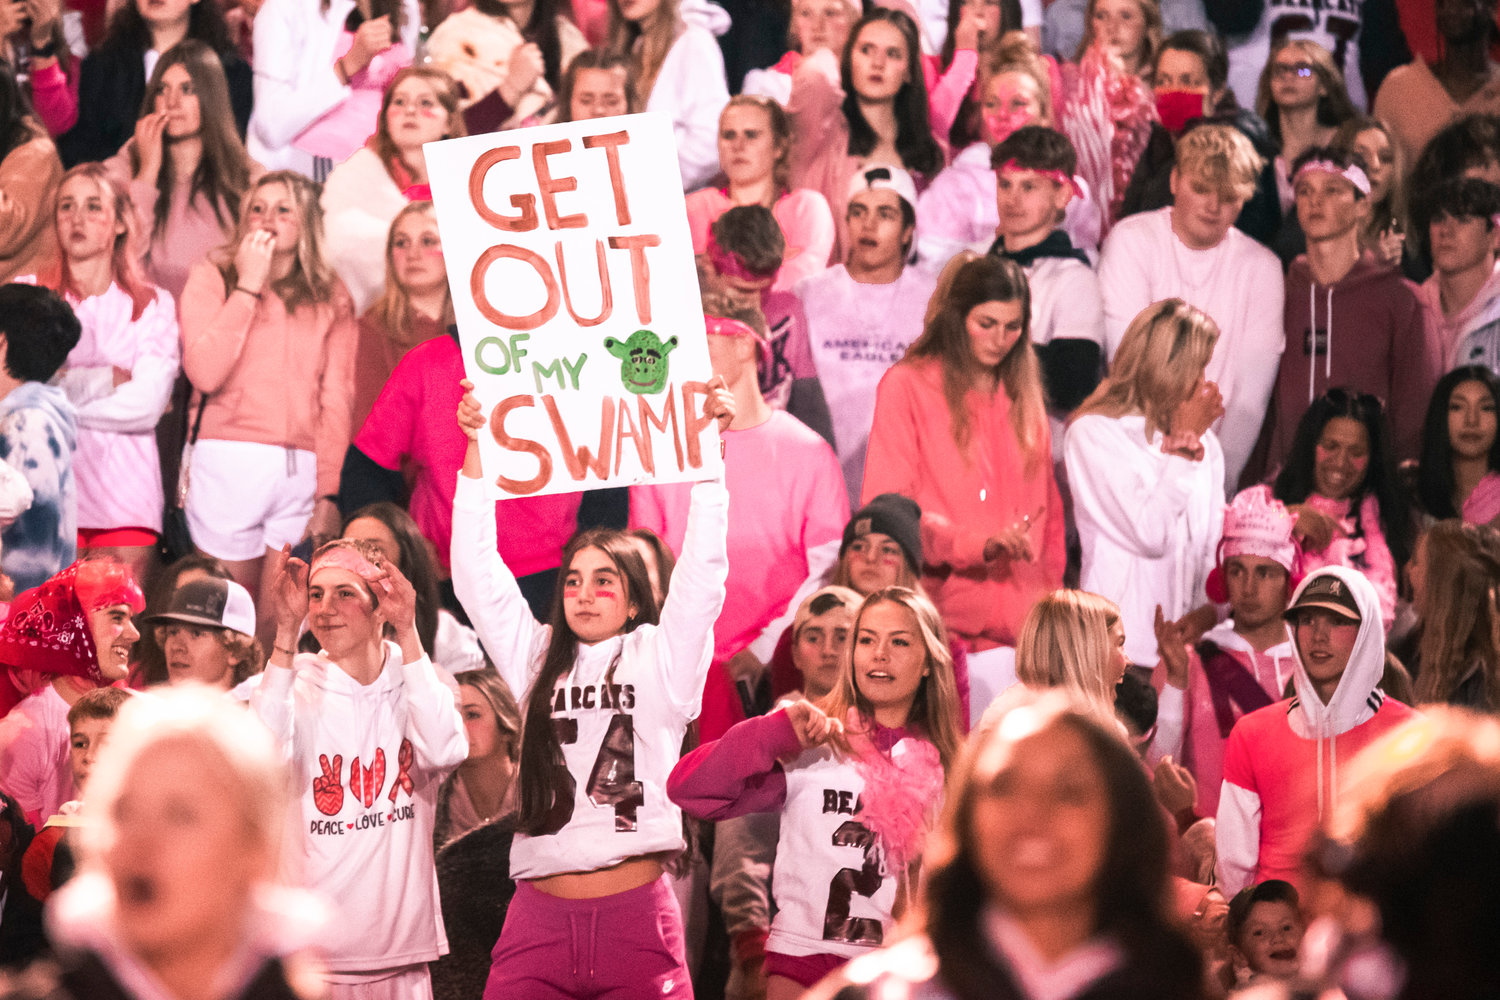 Bearcat fans hold signs and cheer as they watch W.F. West and Centralia football players battle it out on the field Friday night during the Swamp Cup rivalry matchup.